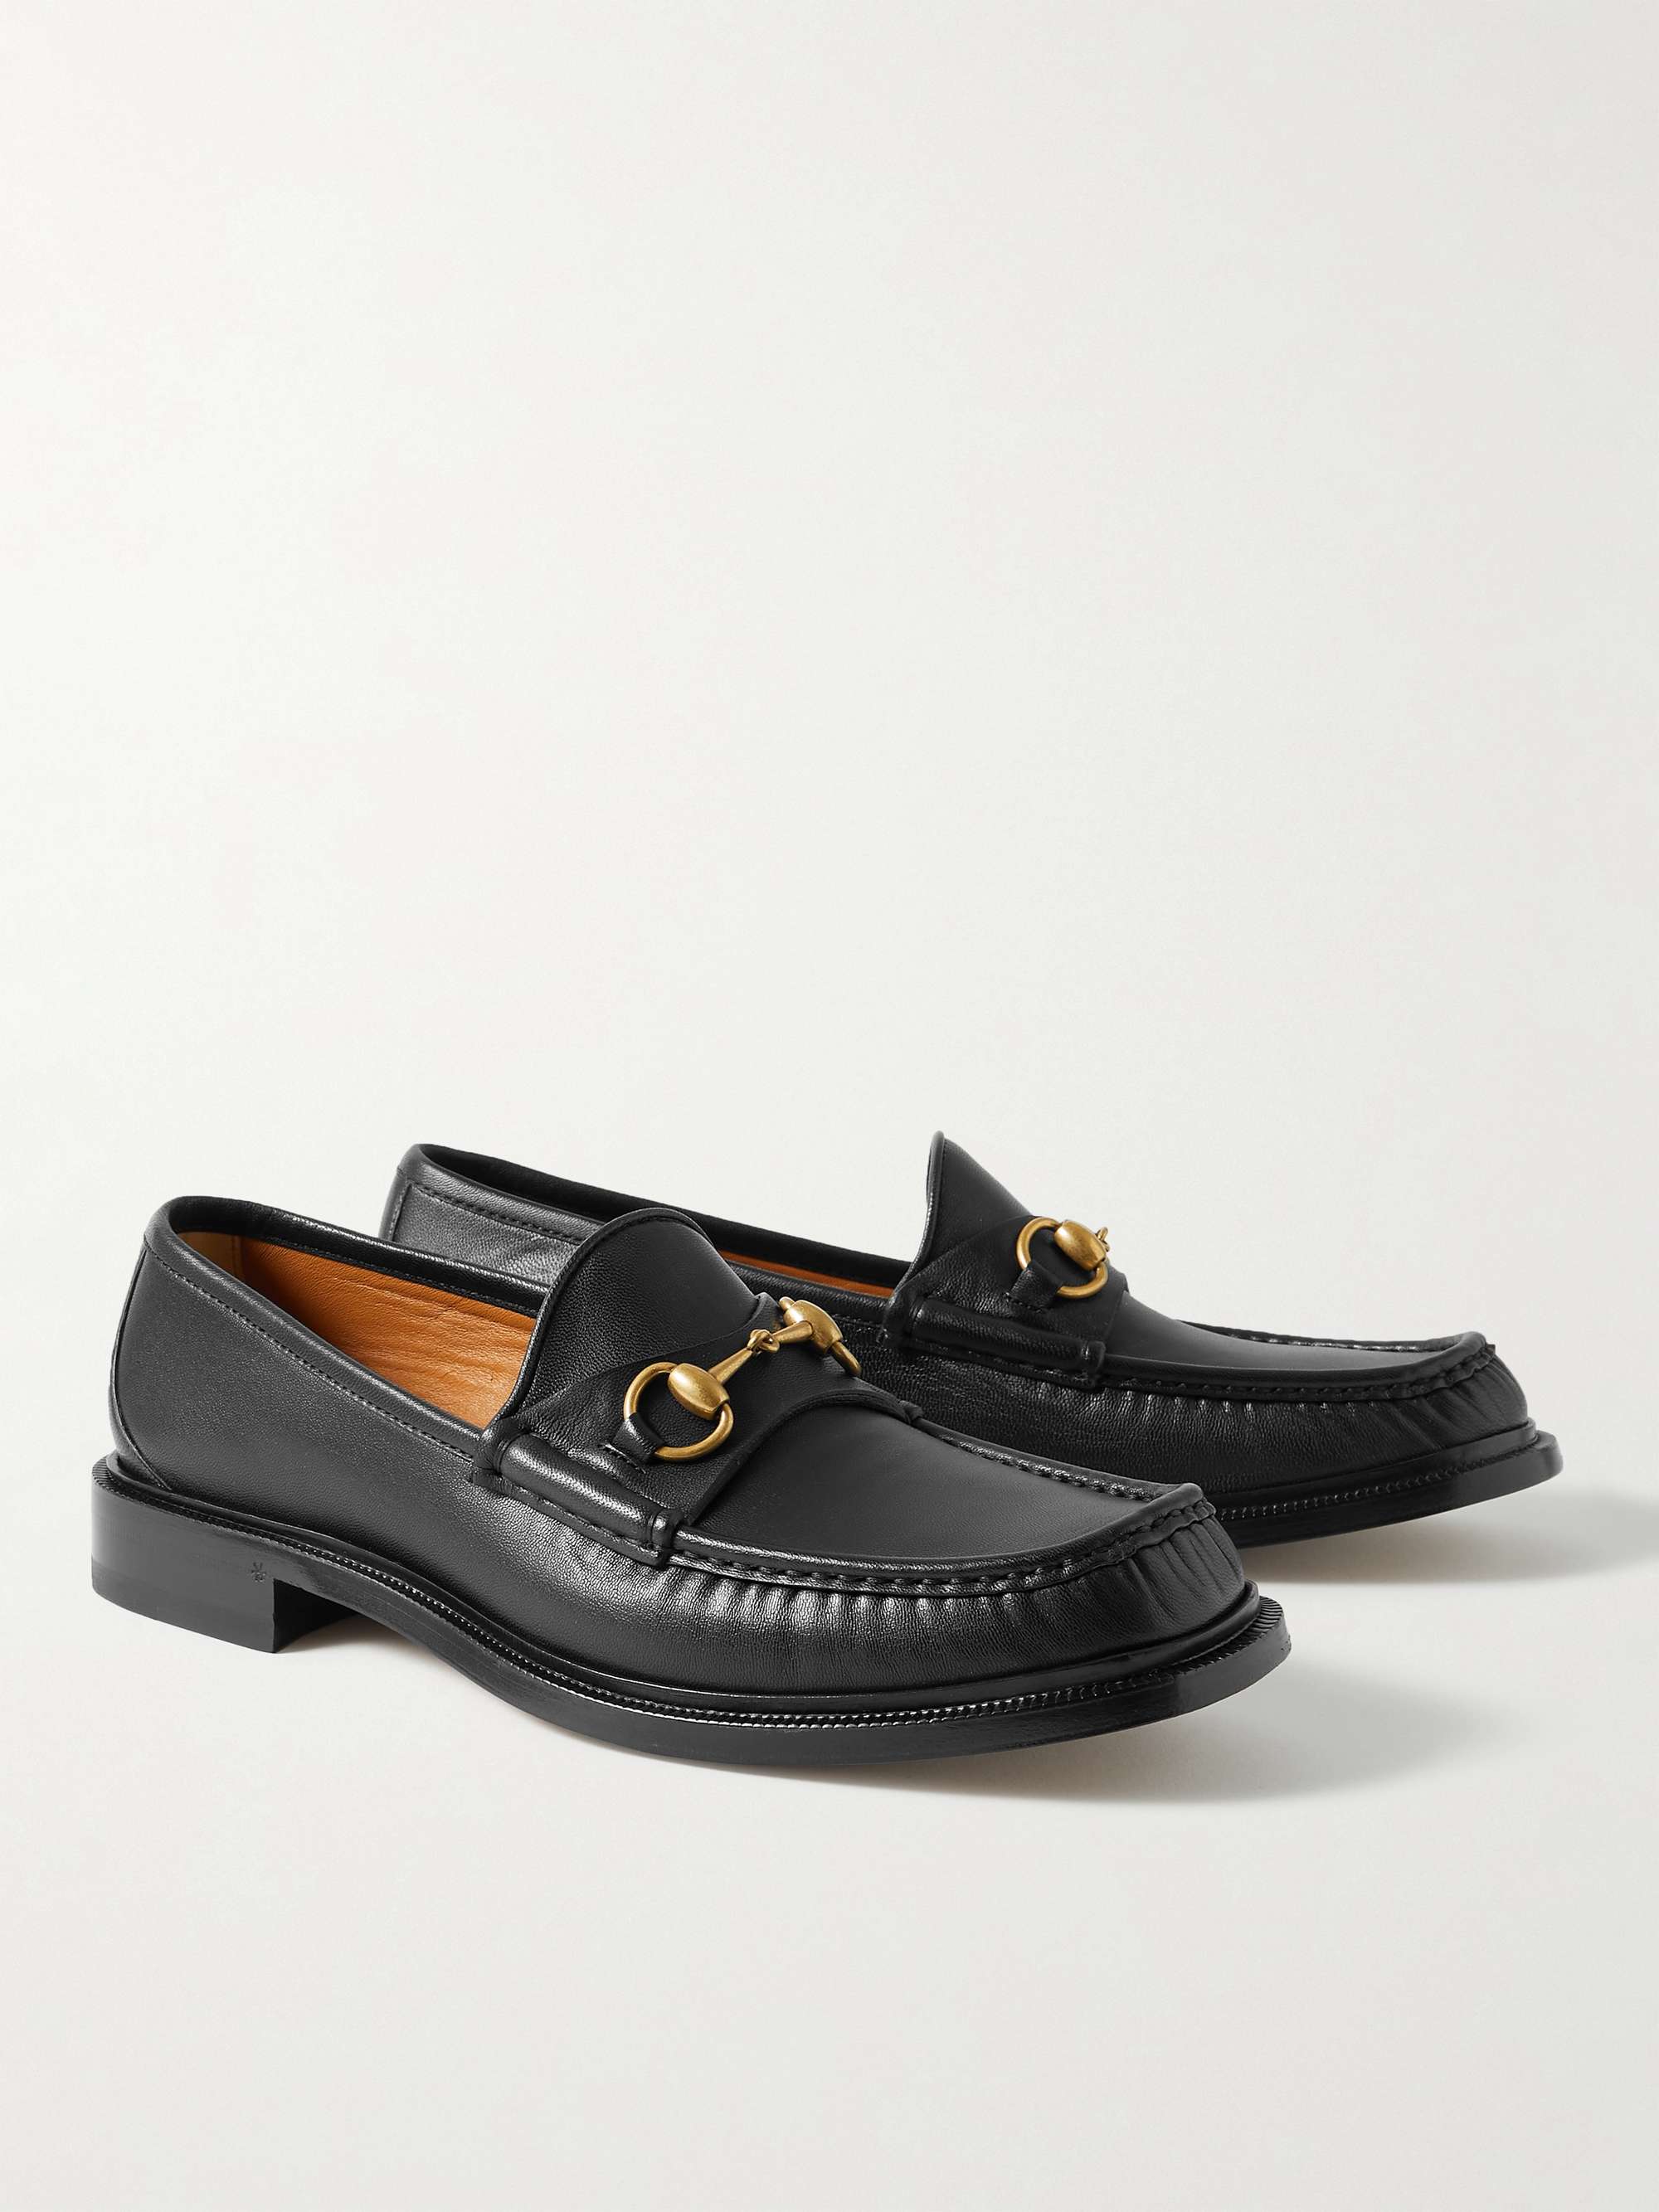 GUCCI Horsebit Leather Loafers